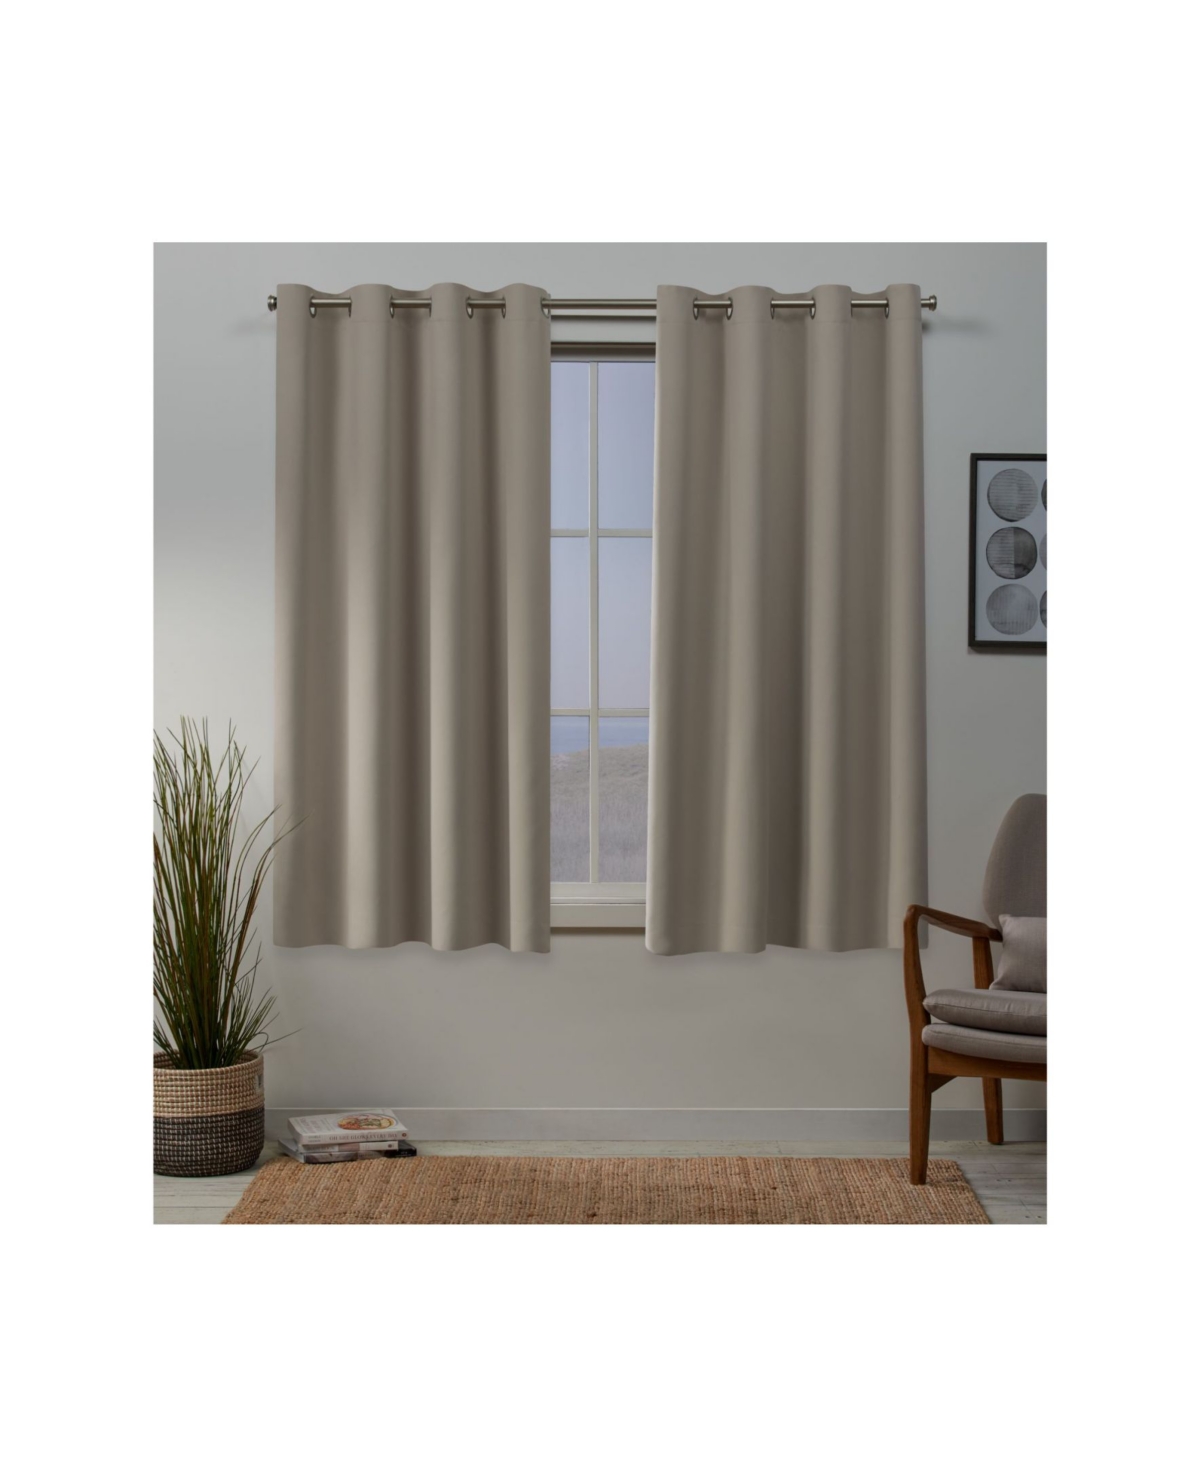 Sateen Twill Woven Blackout Grommet Top Curtain Panel Pair, 52" x 63" - Brown